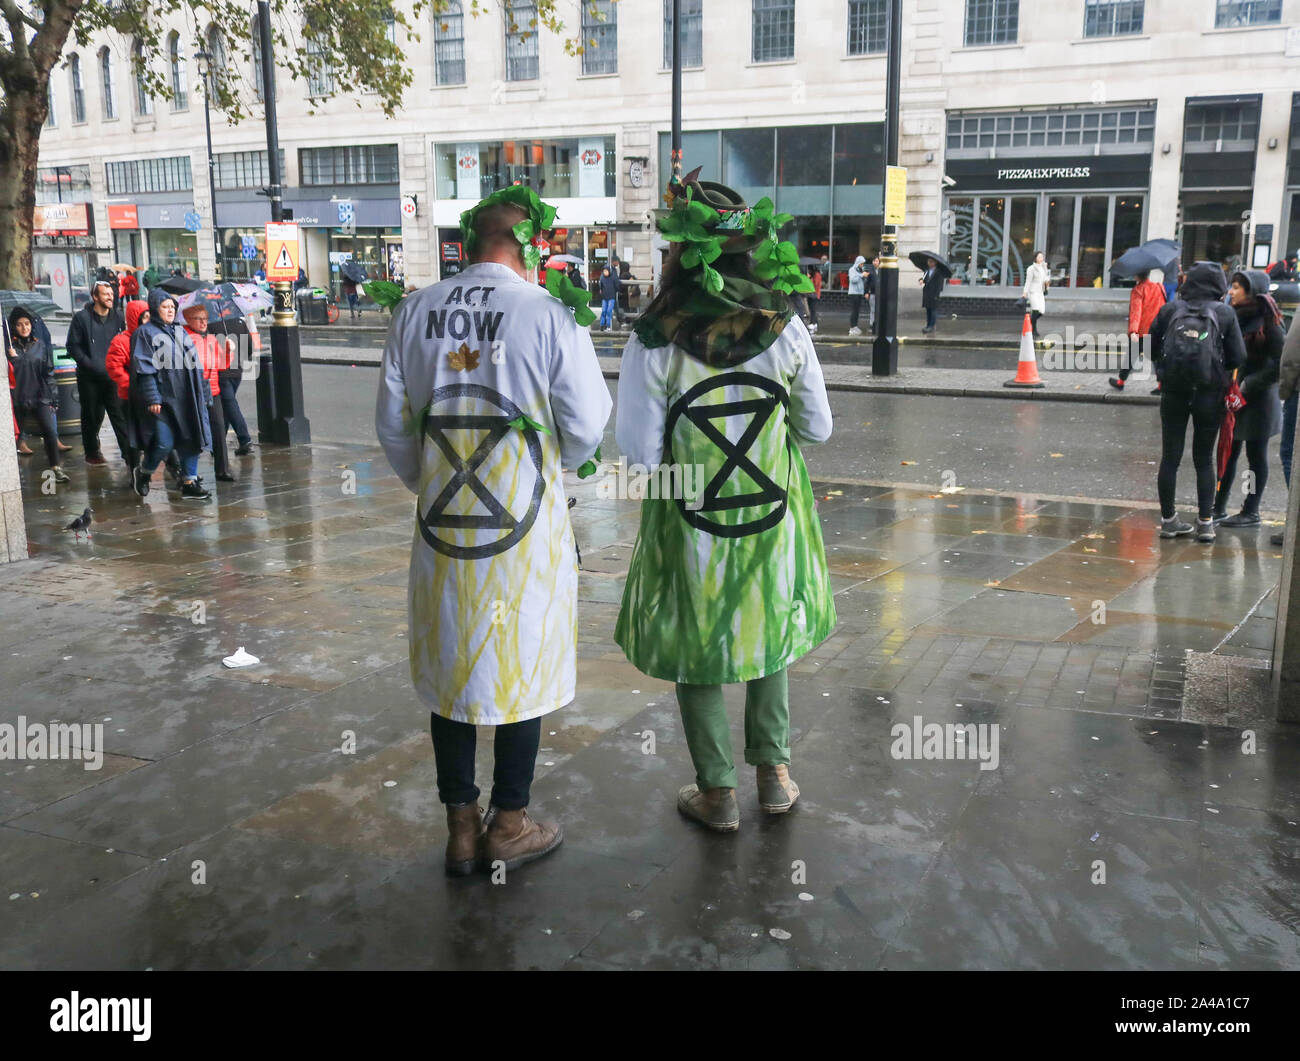 London, UK - 13 October 2019. Climate activists from Extinction Rebellion continue their protest  in Trafalgar Square in an attempt to force the government to declare a climate emergency and meet their demands to reduce to zero carbon emmissions by 2025. Credit: amer ghazzal/Alamy Live News Stock Photo